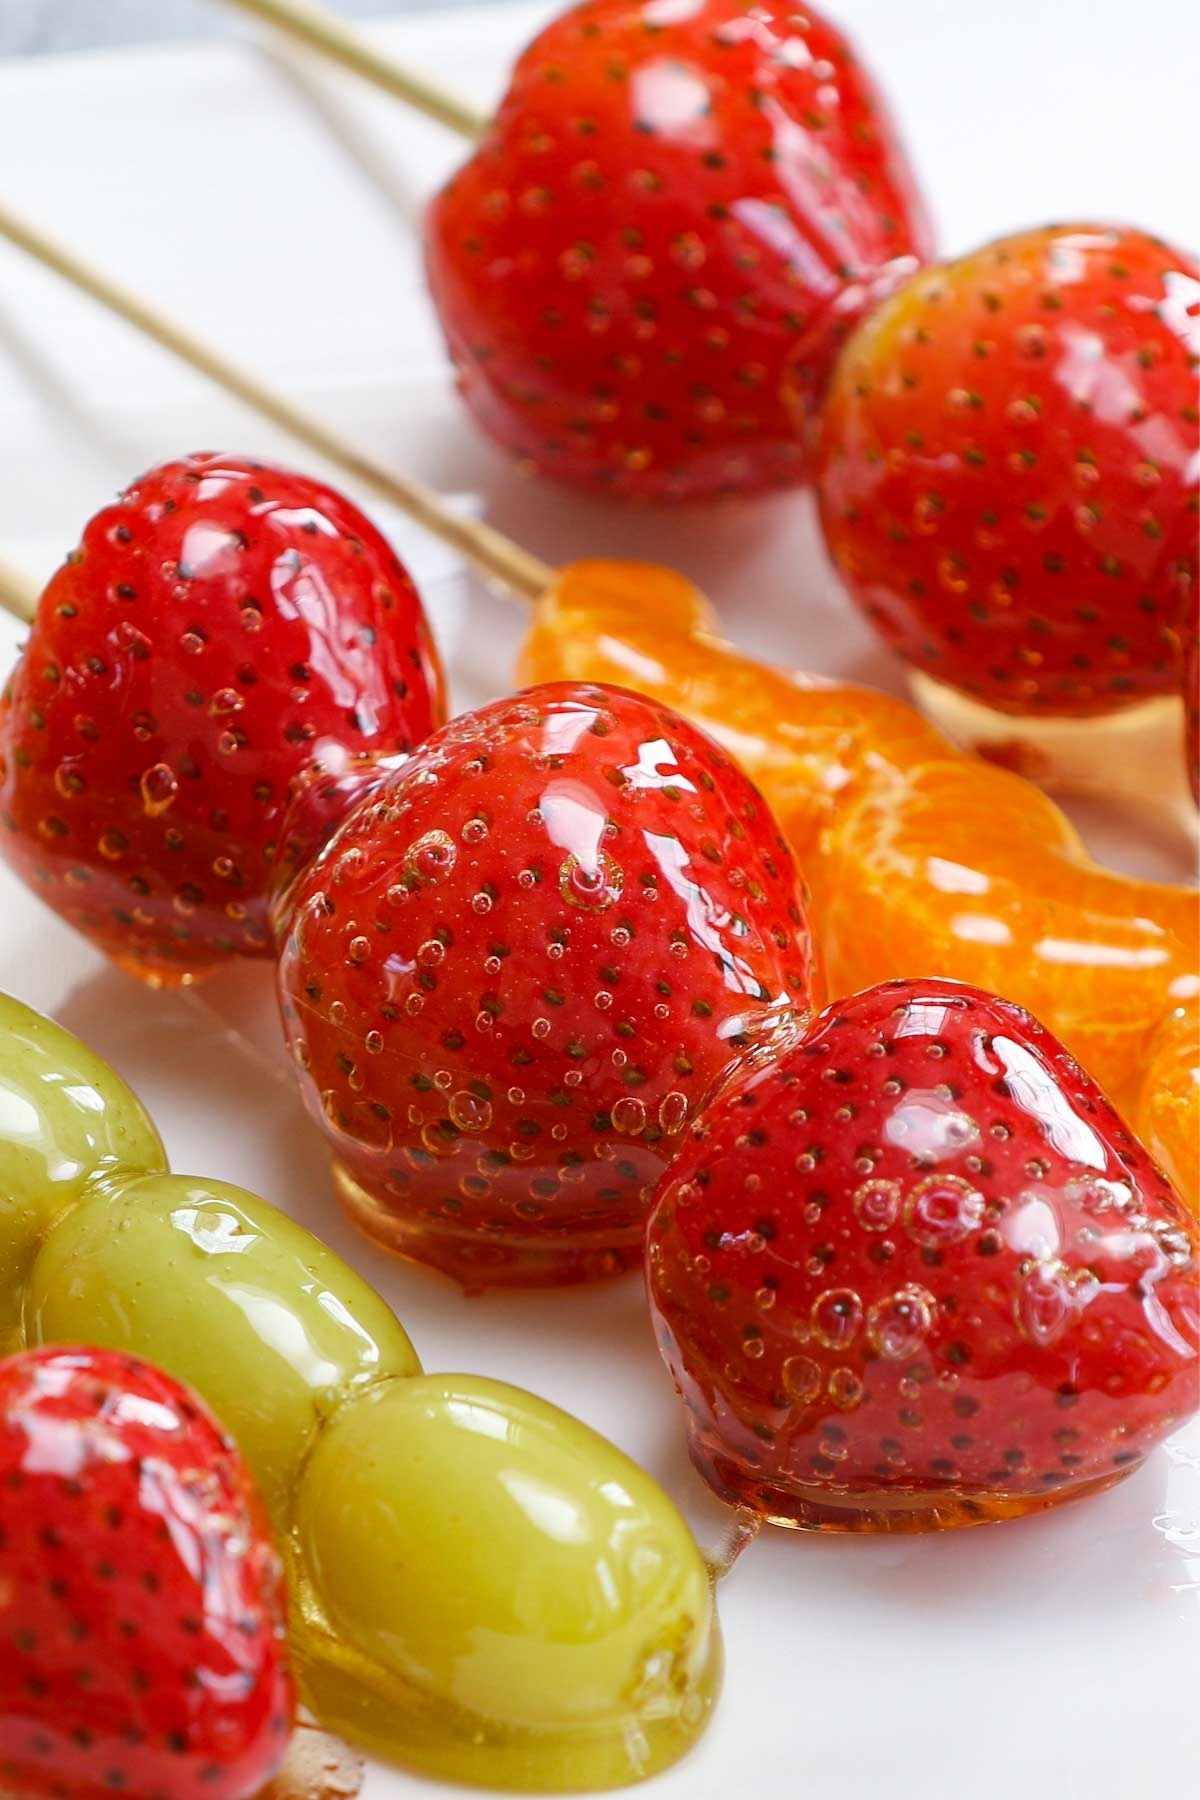 Also called Tanghulu, these Candied Fruits are as pretty as they are delicious. Juicy strawberries, grapes or tangerine wedges are coated in a hardened sugar syrup that forms a sweet crunchy shell around the fruit.